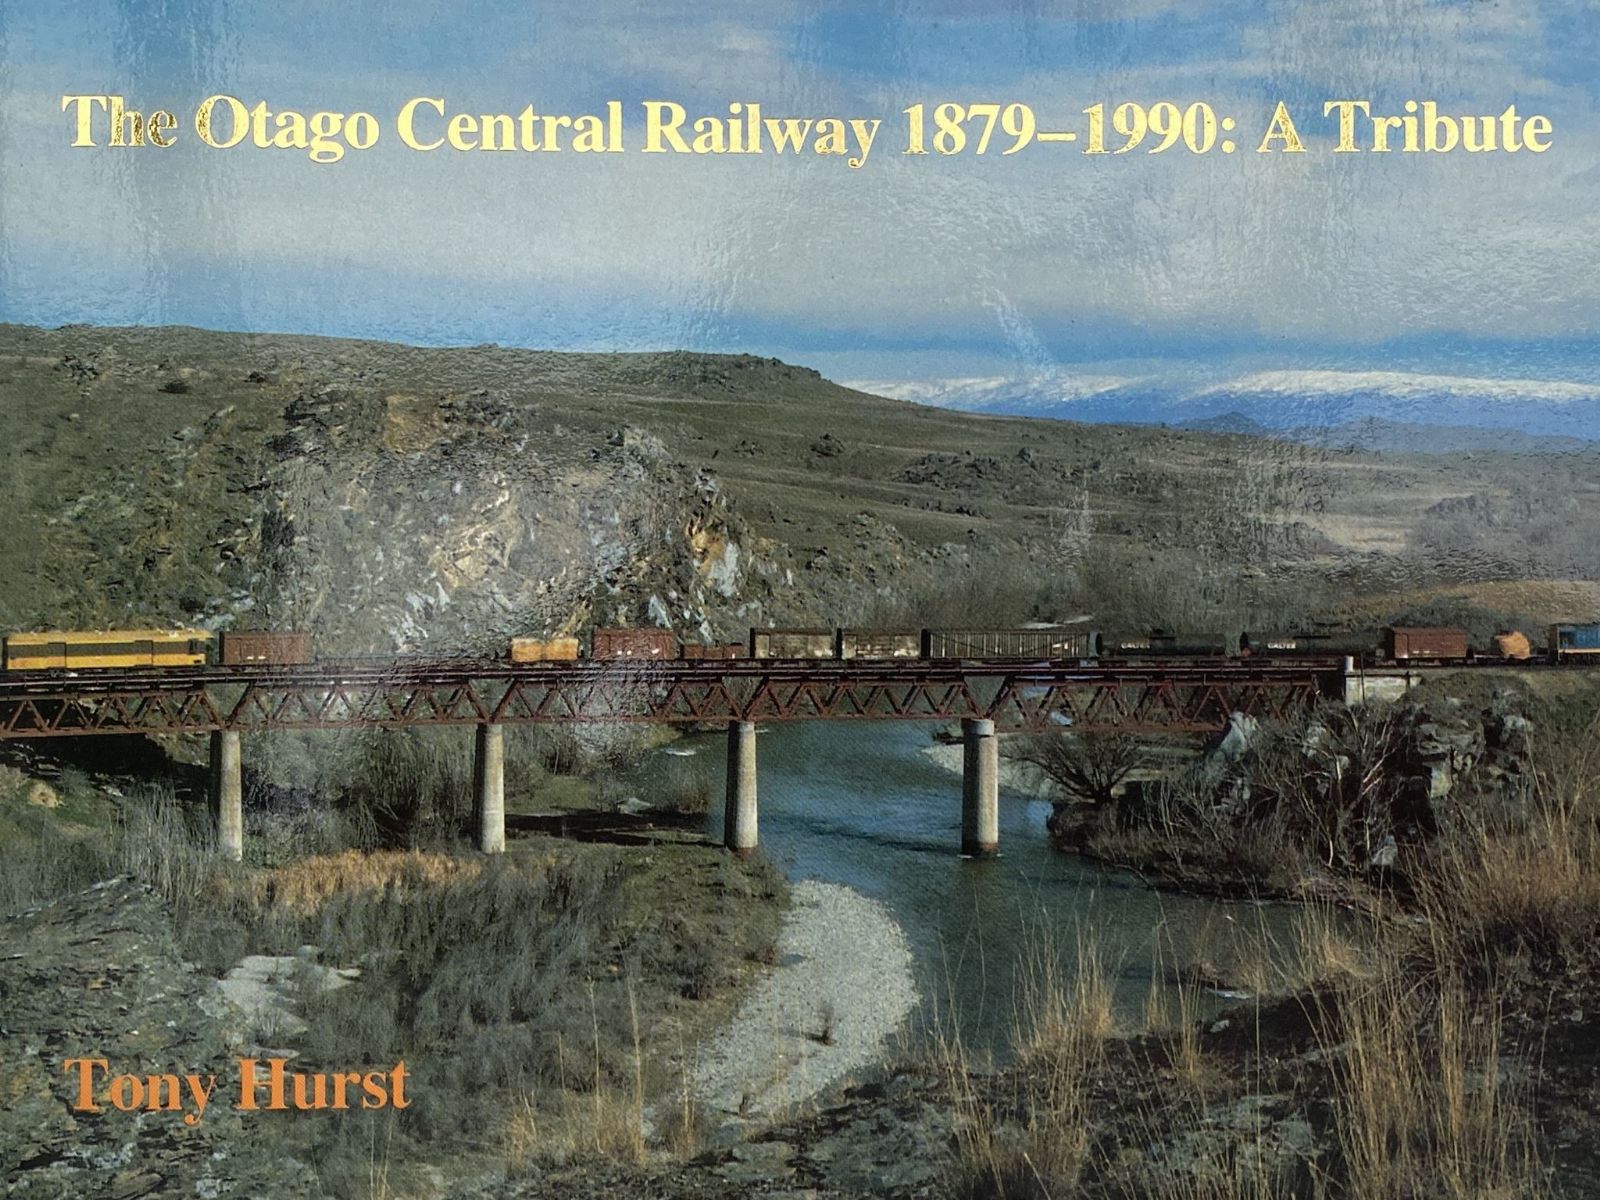 The Otago Central Railway 1879-1990: A Tribute